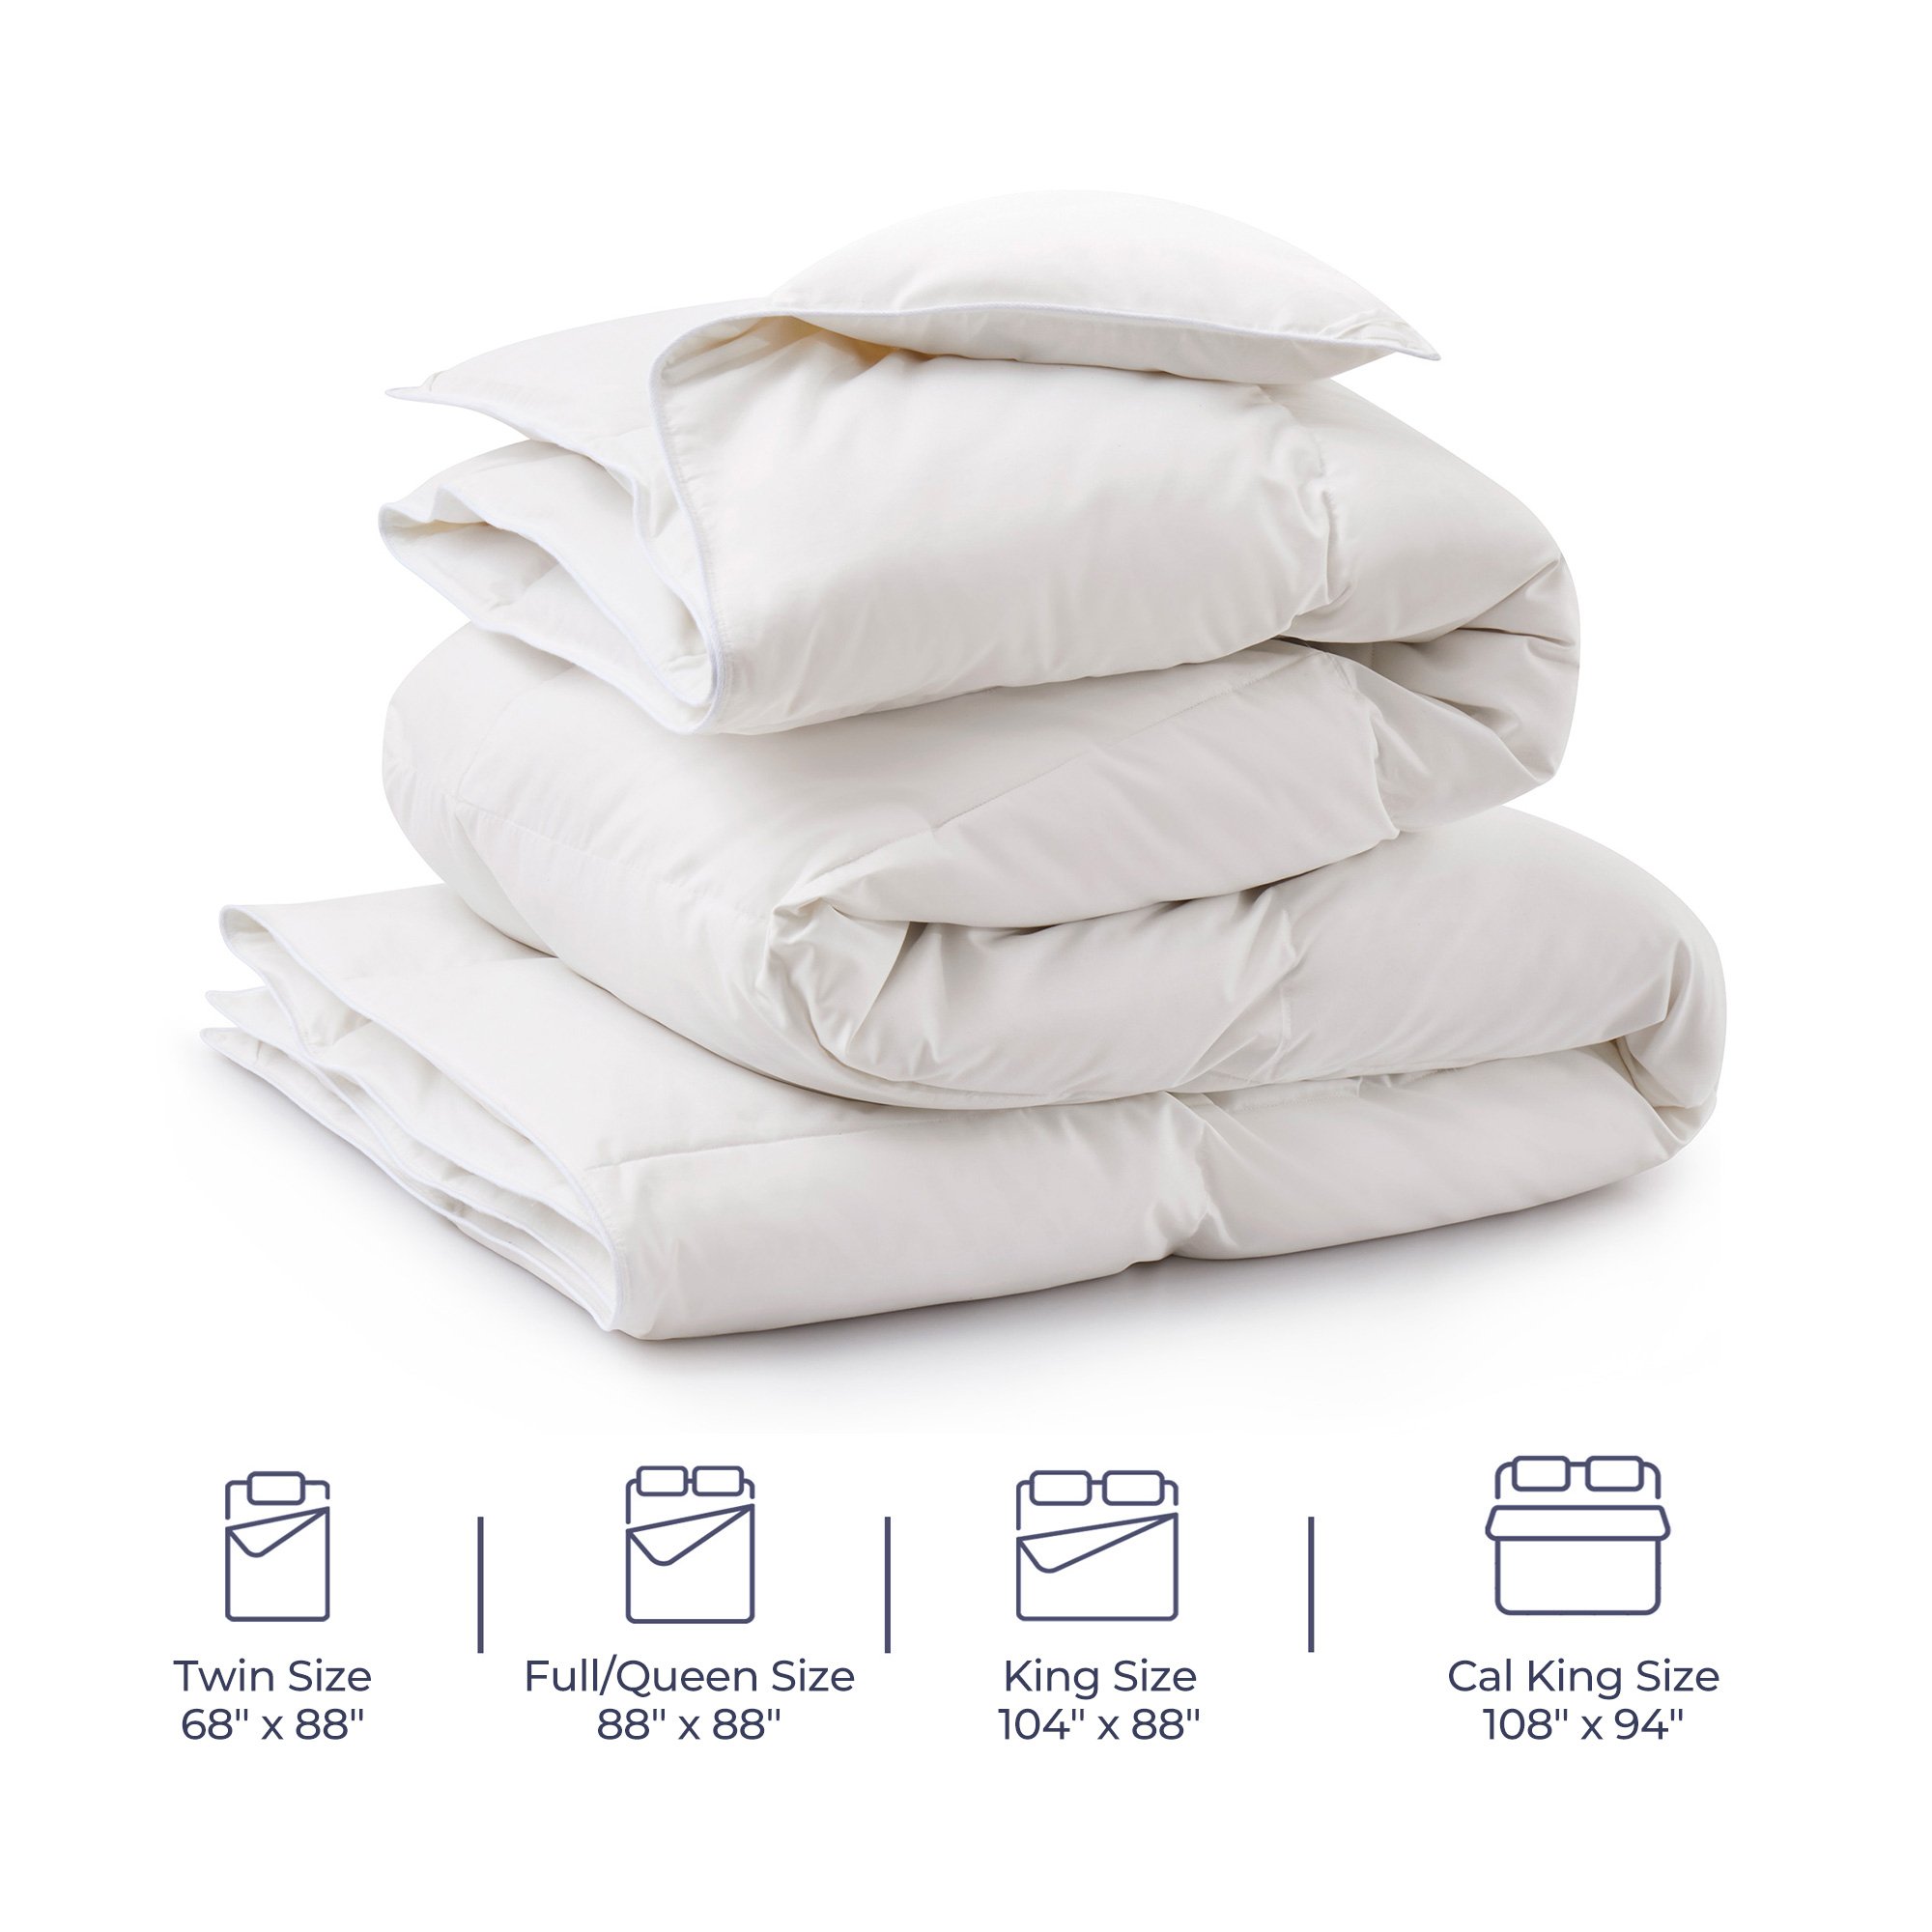 Premium All Seasons White Goose Feather Fiber And Down Comforter - Lucent White, Full/Queen